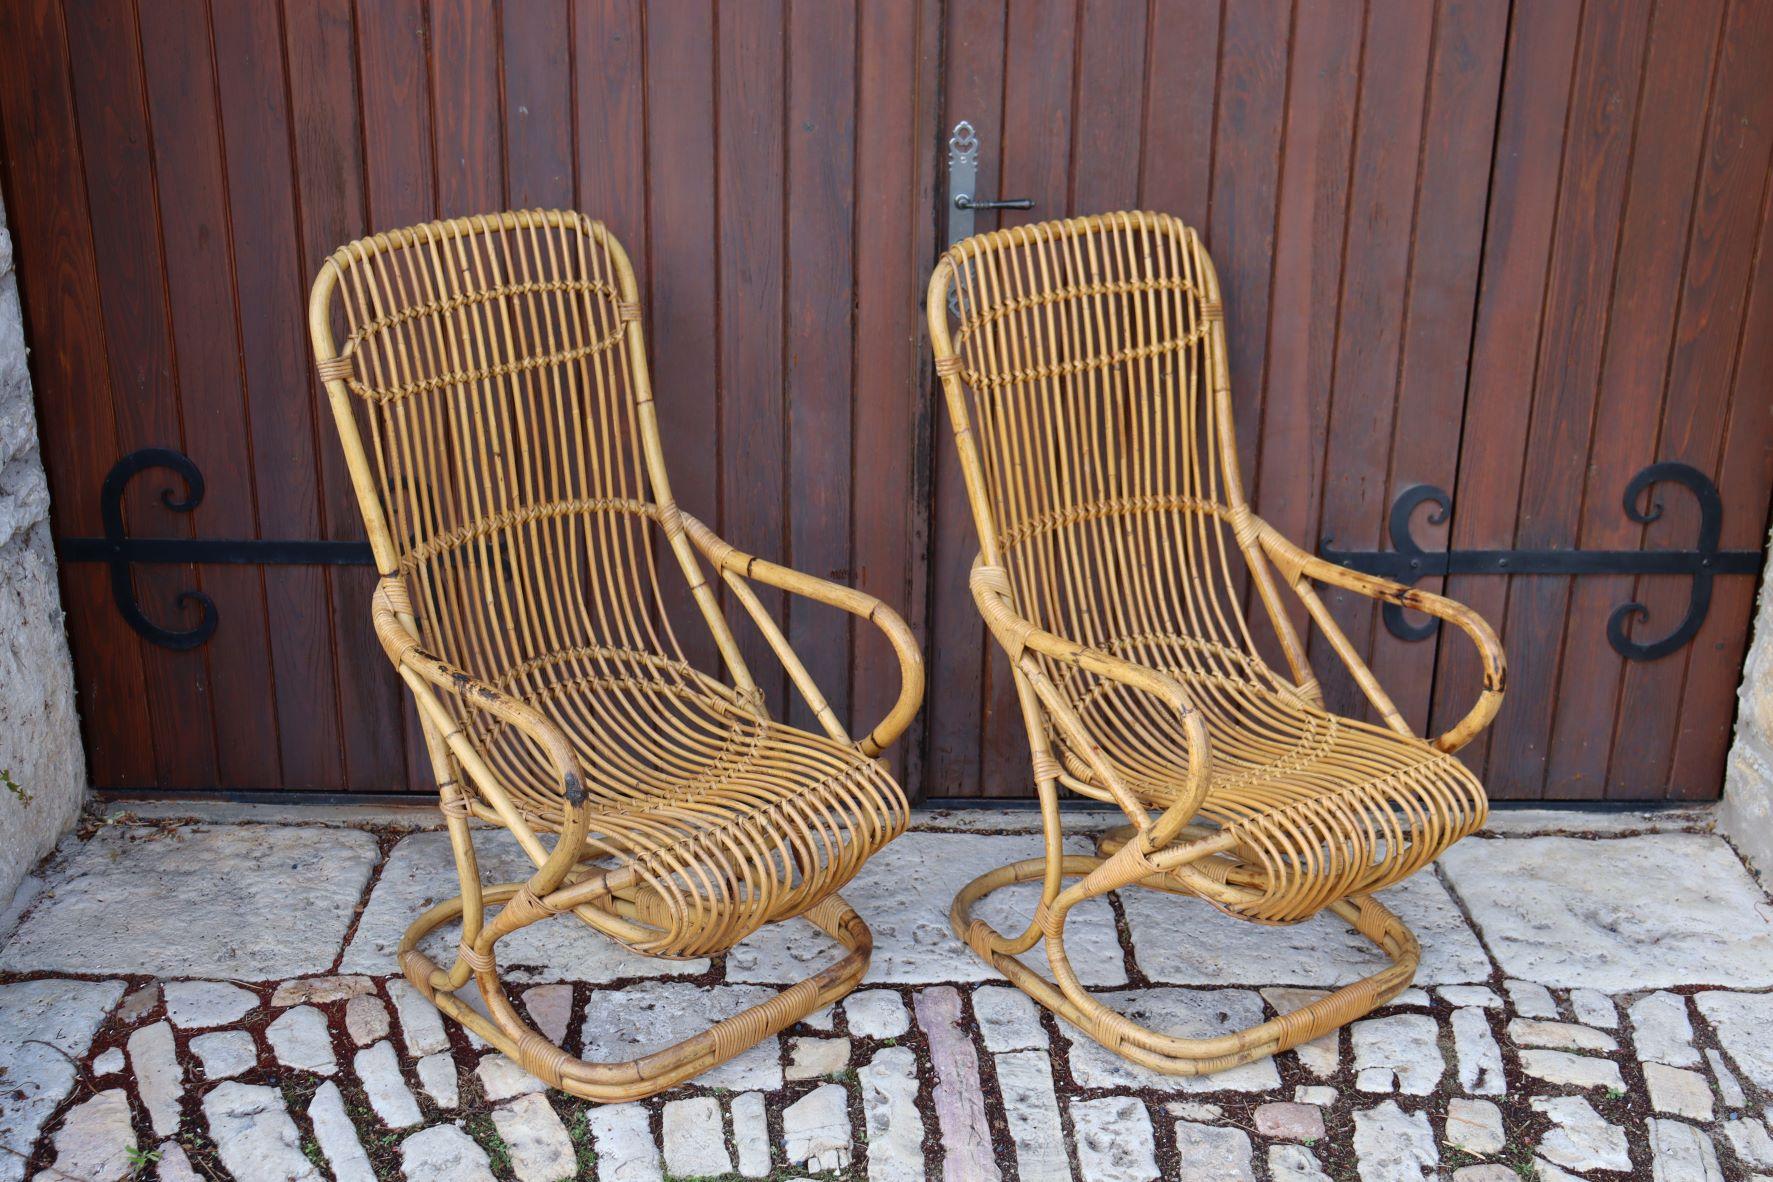 Pretty pair of rattan armchairs from the 60s by tito agnoli, made by bonacina.